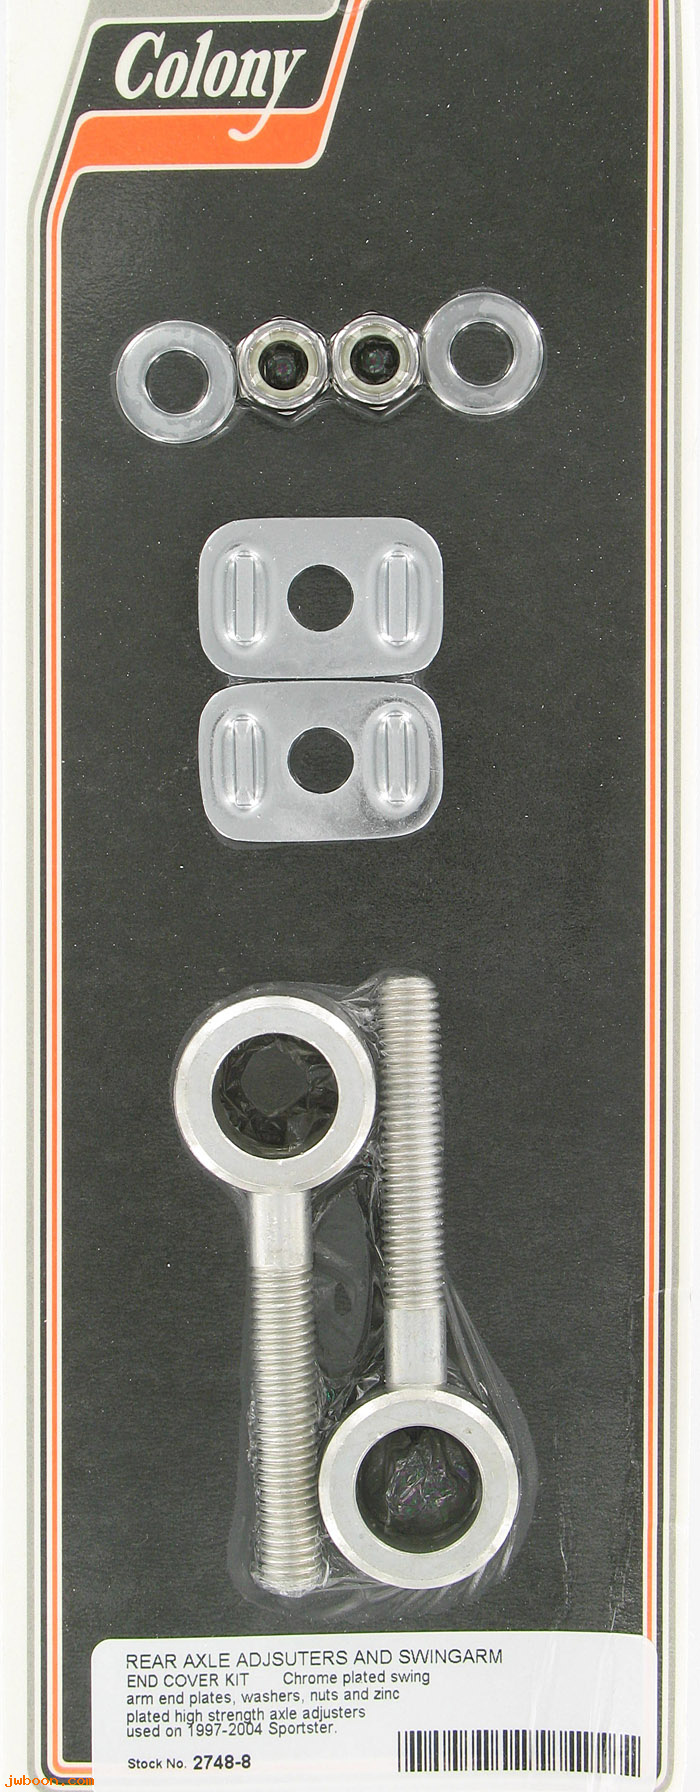 C 2748-8 (): Rear axle adjusters and swingarm end cover kit - XL '97-'04